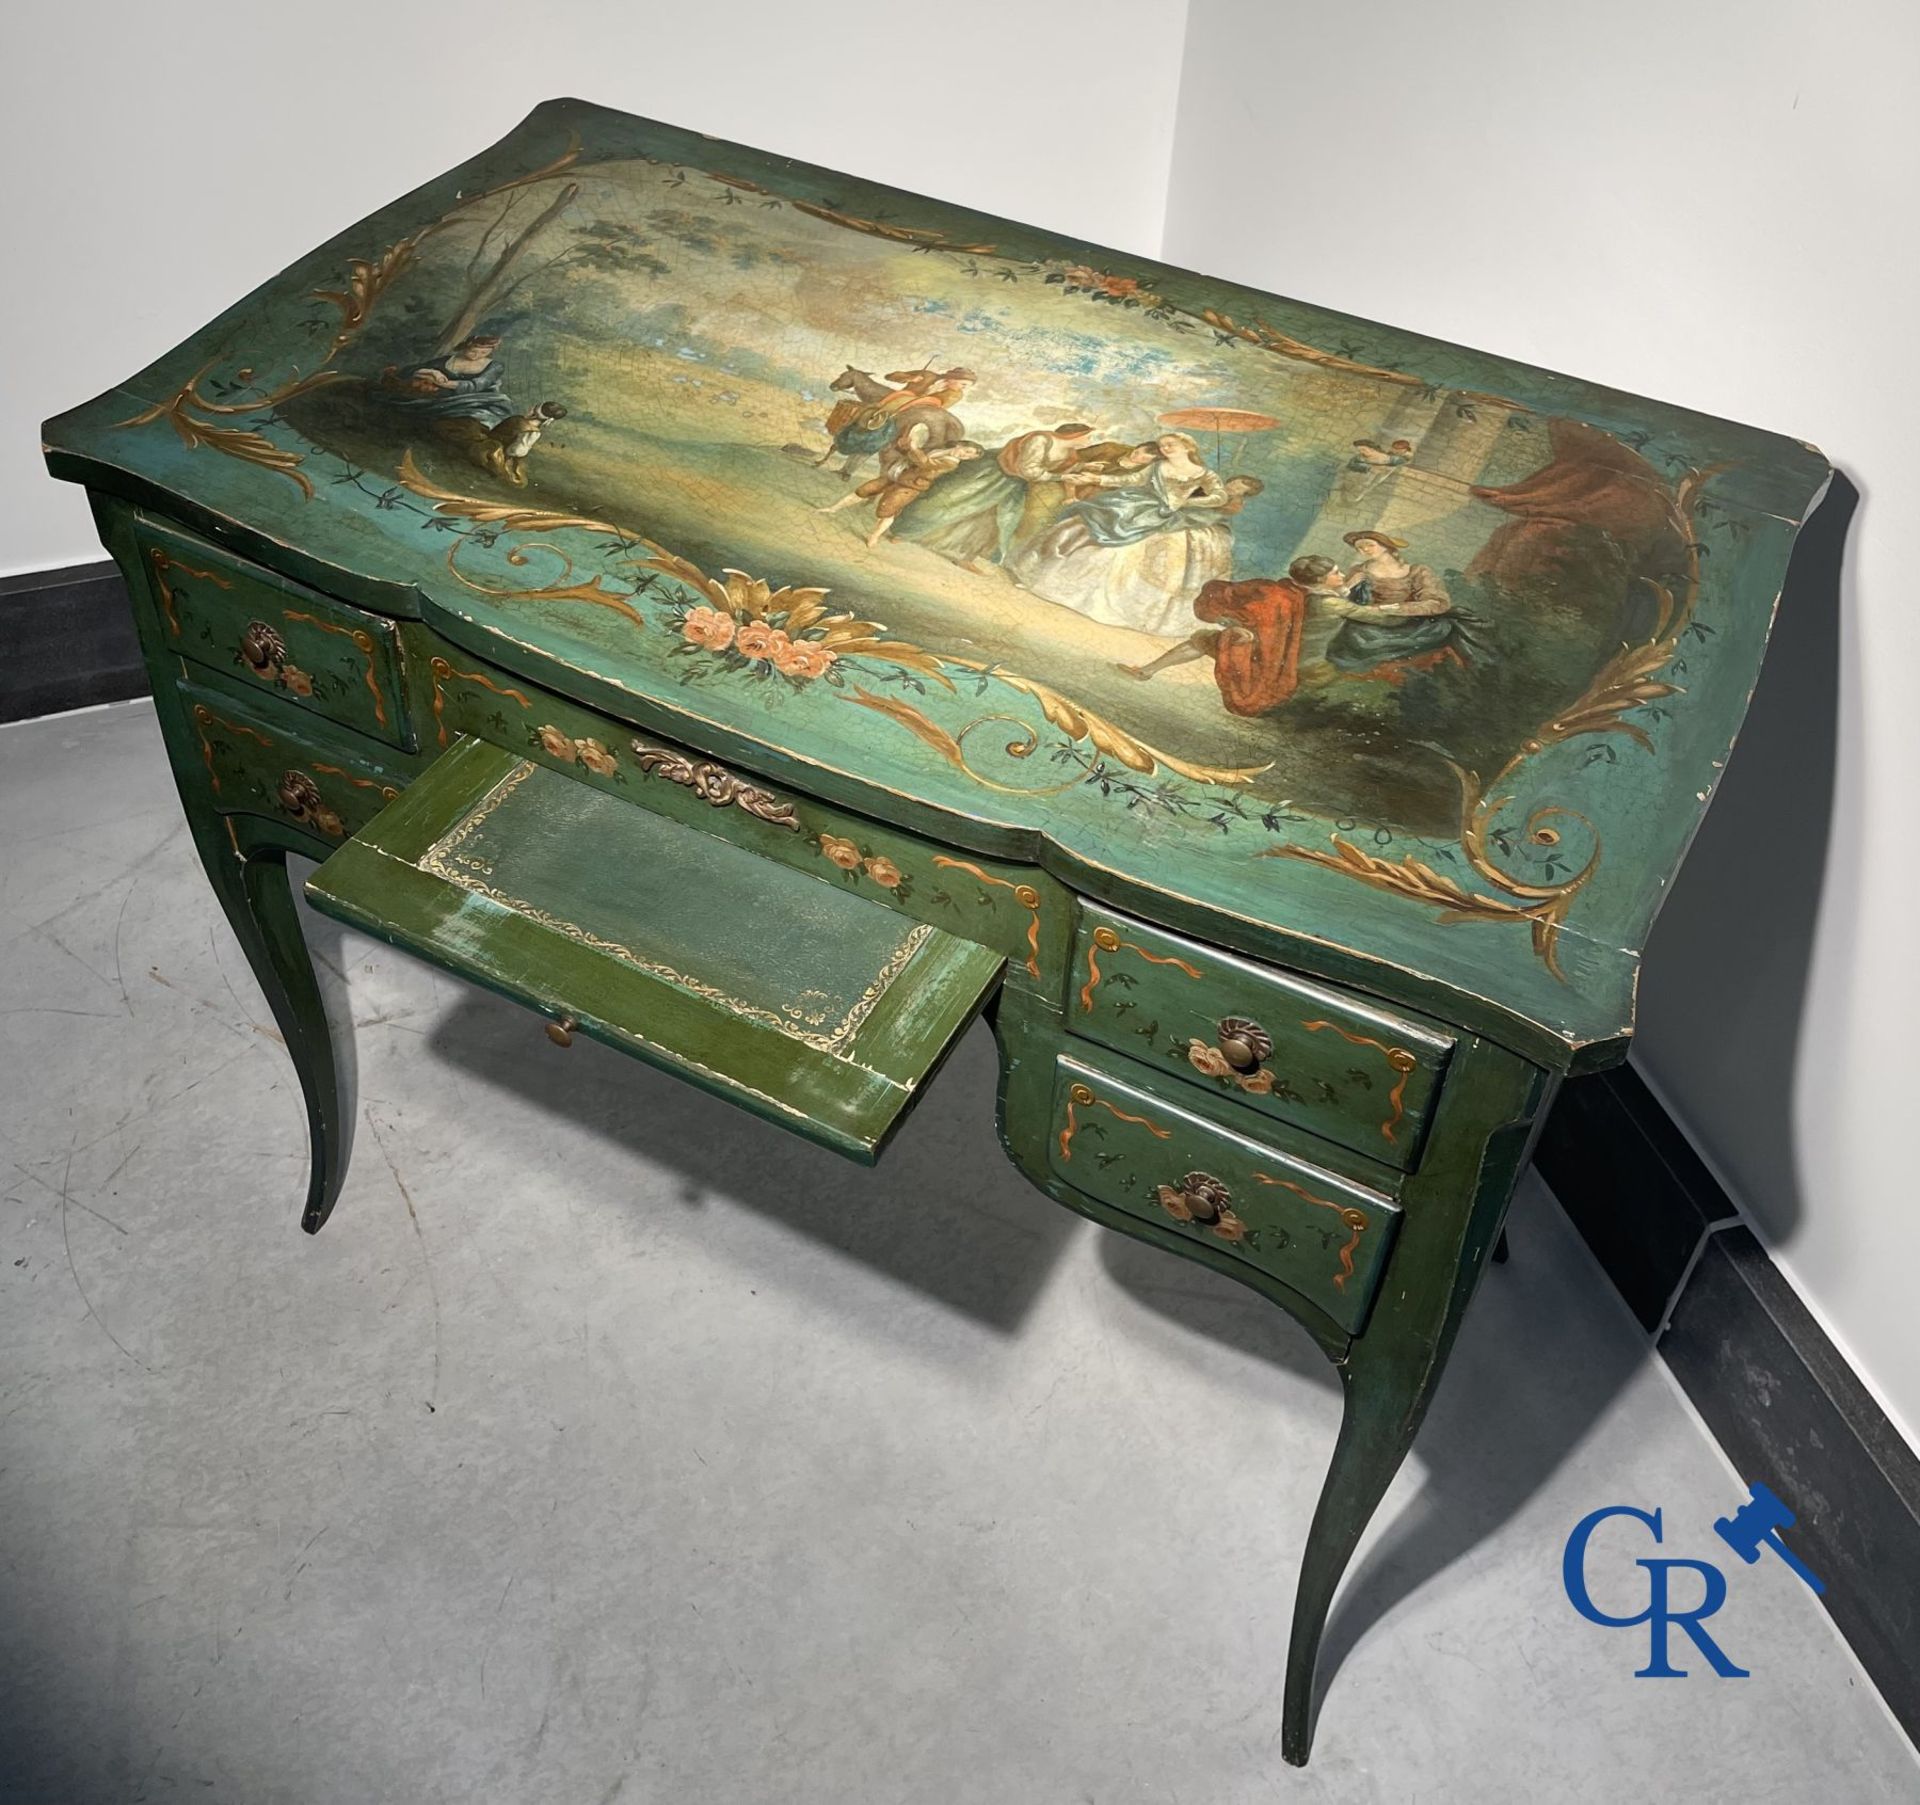 Ladies dressing table with gallant paintings, and a lacquered armchair transitional period Louis XV  - Image 4 of 17